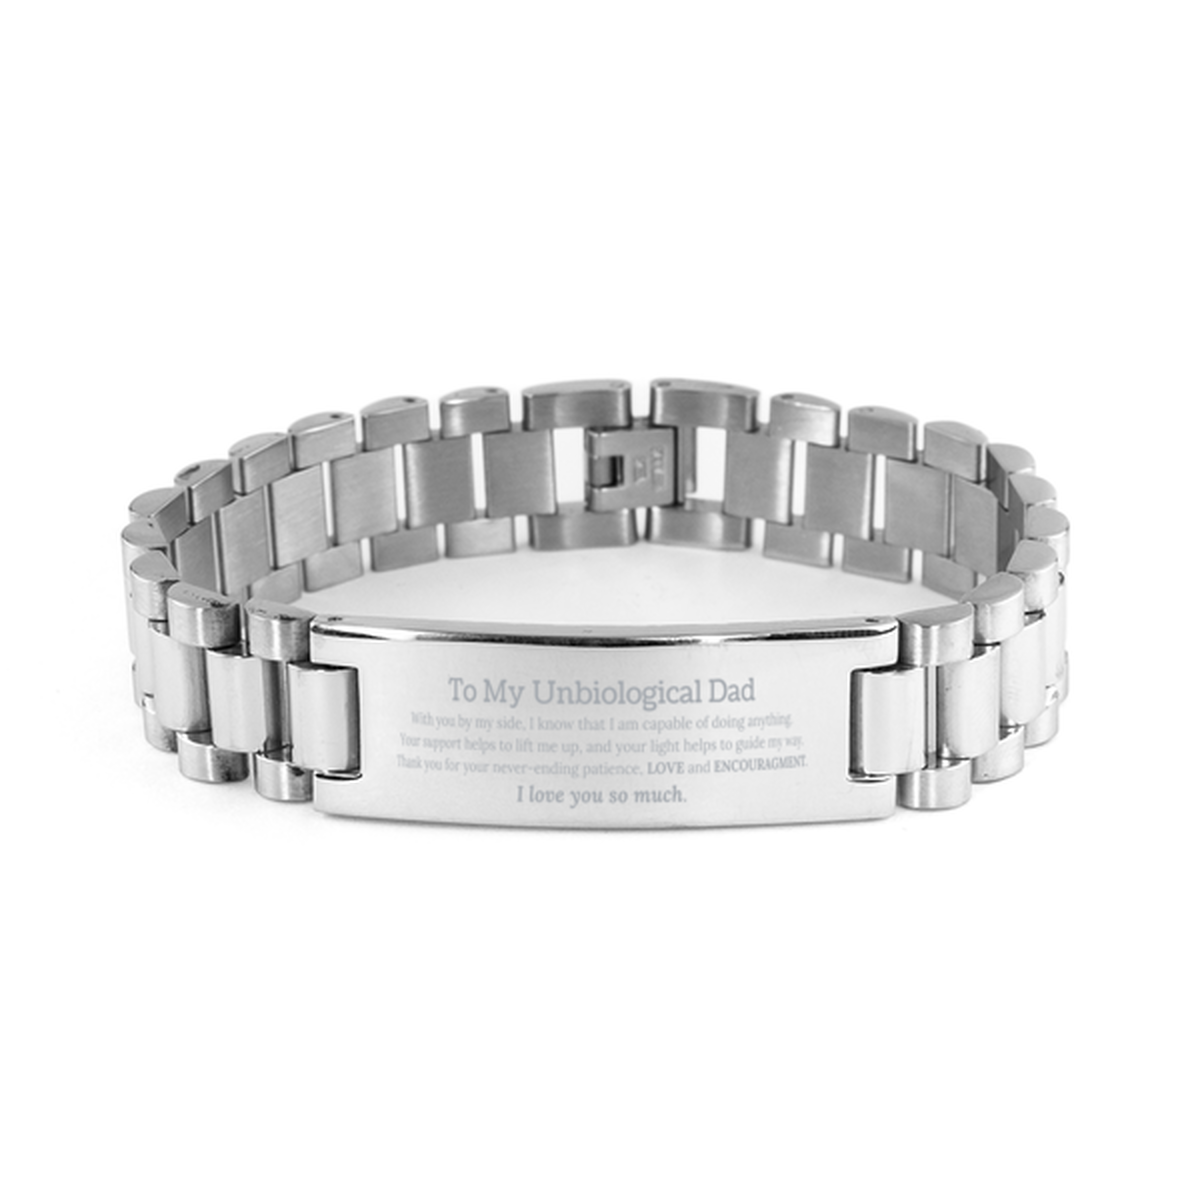 Appreciation Unbiological Dad Ladder Stainless Steel Bracelet Gifts, To My Unbiological Dad Birthday Christmas Wedding Keepsake Gifts for Unbiological Dad With you by my side, I know that I am capable of doing anything. I love you so much